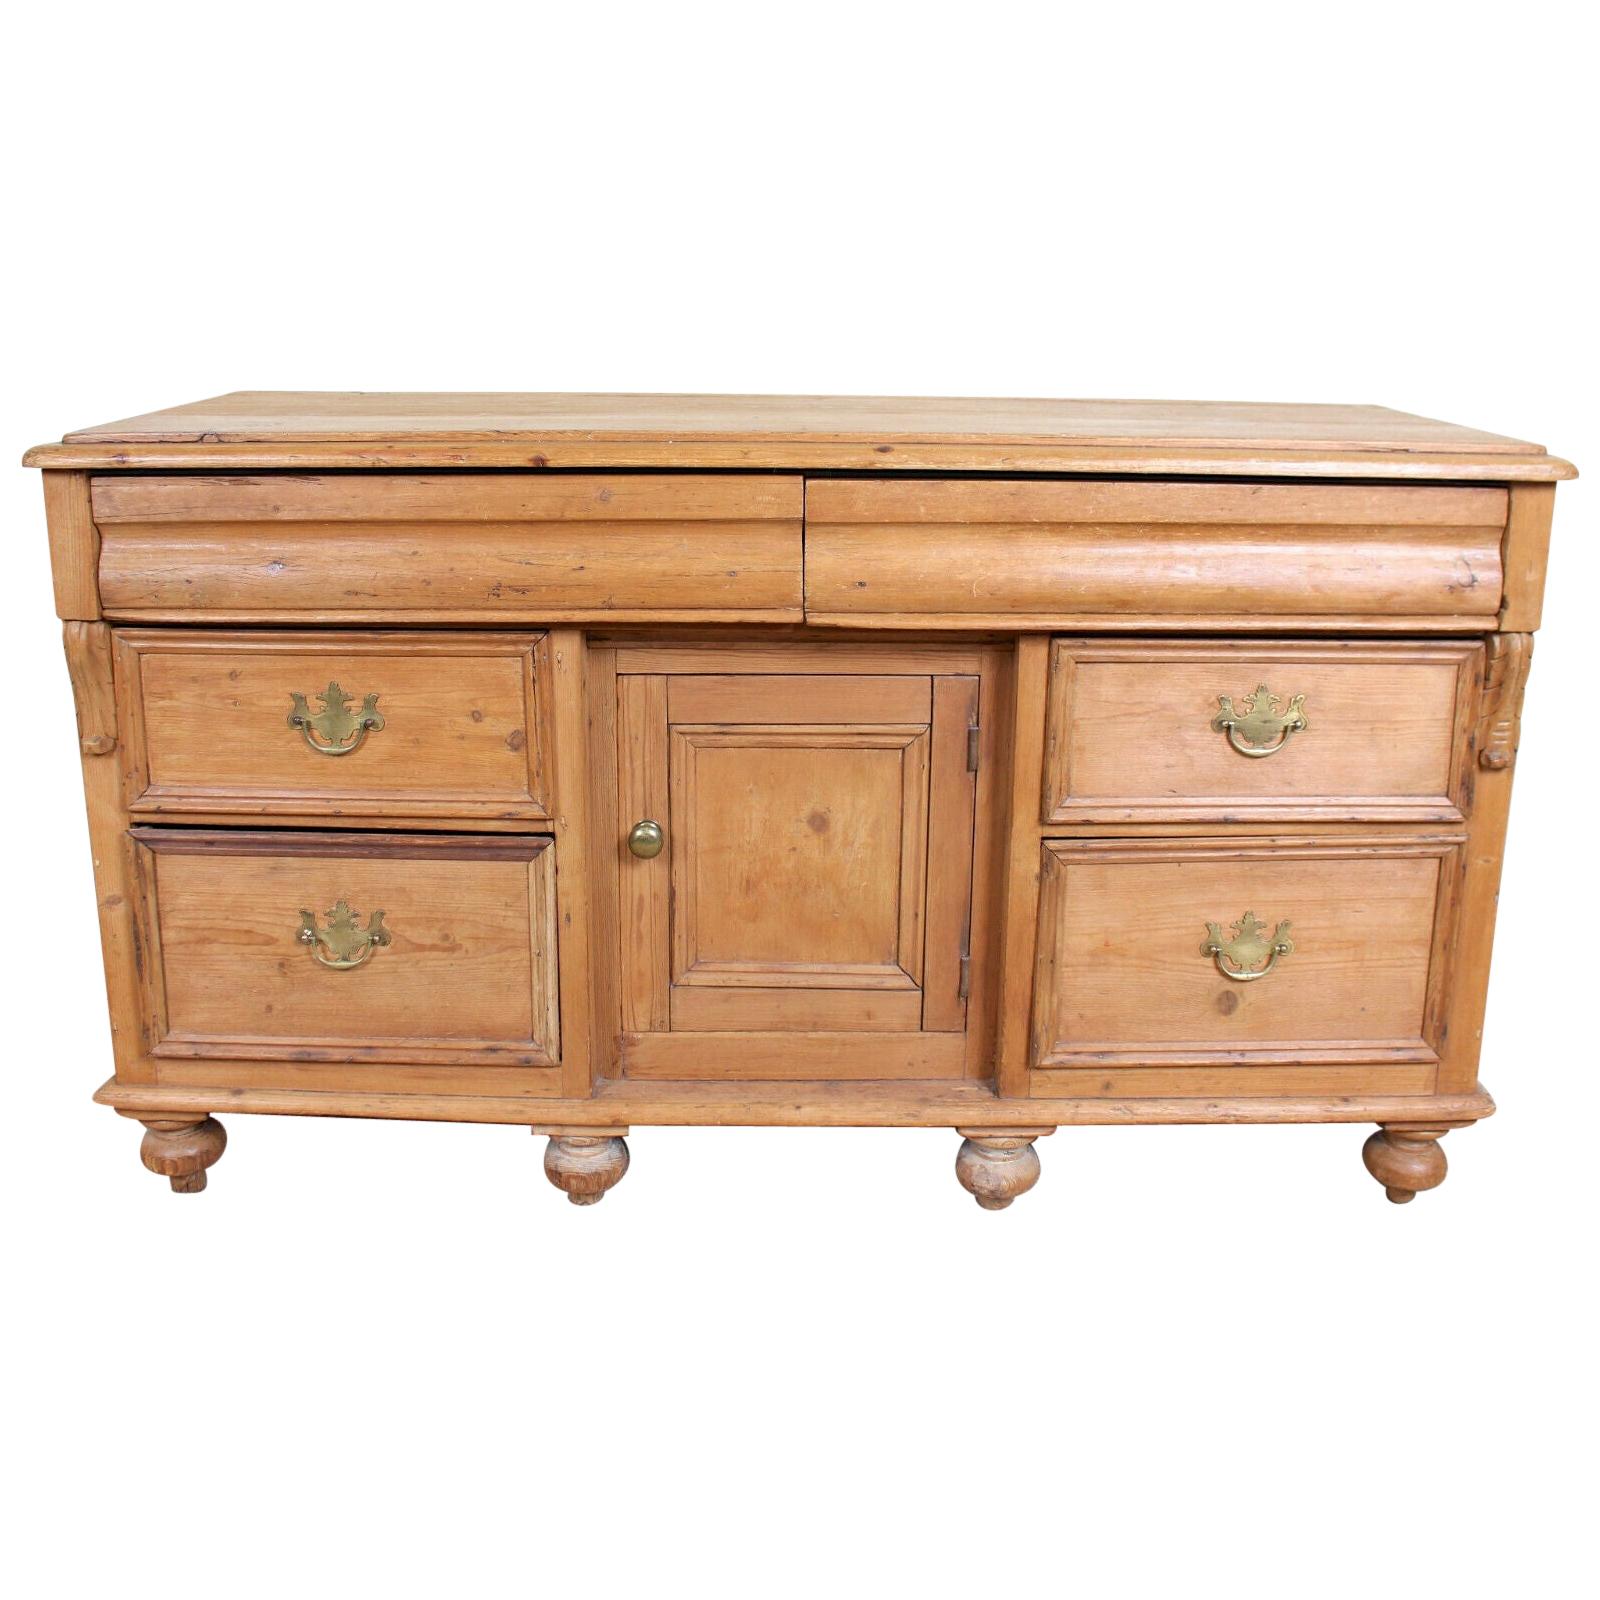 English Pine Sideboard Dresser Base Large Arts & Crafts Country Farm Rustic